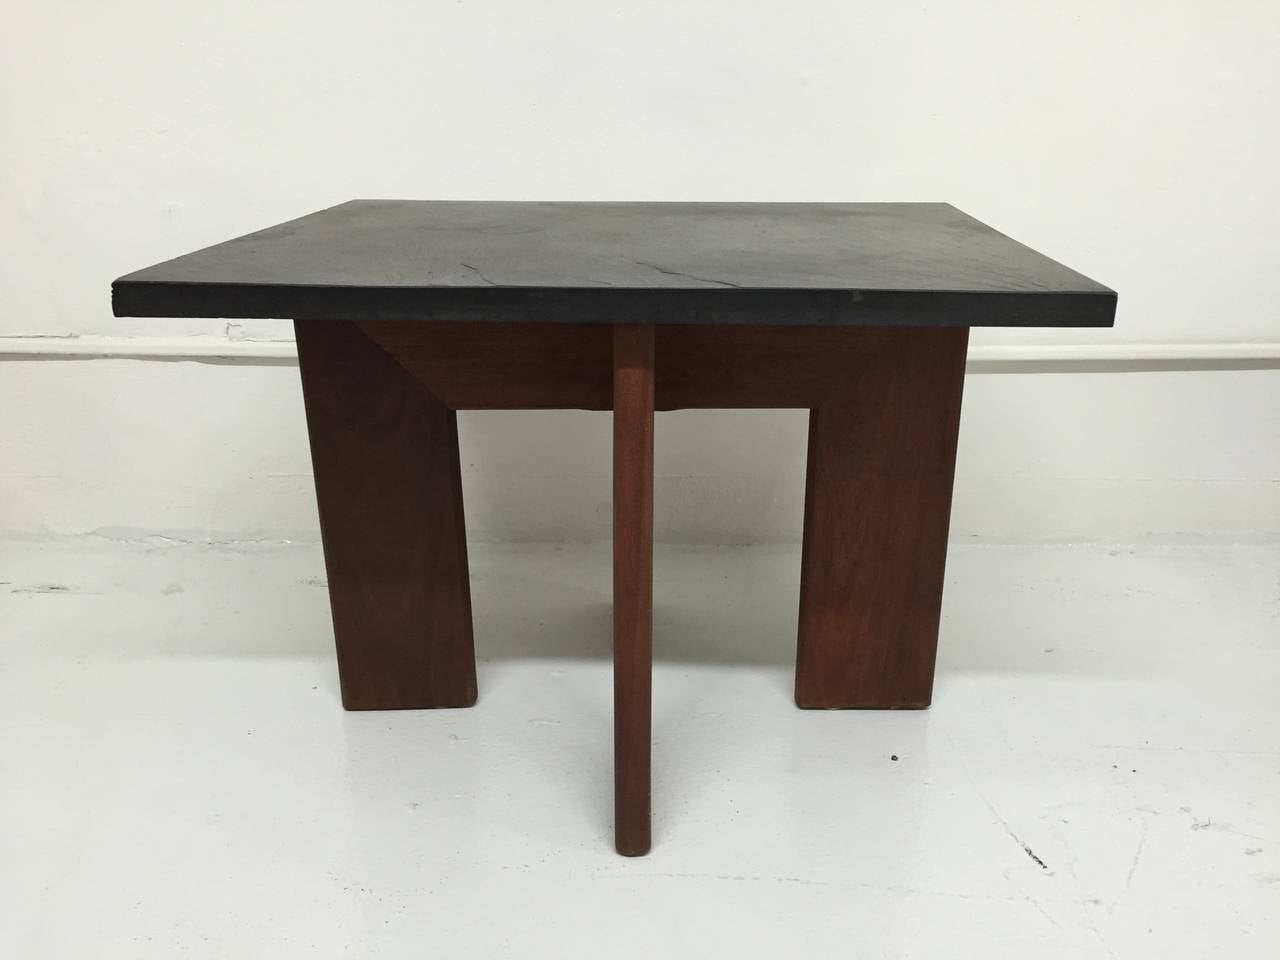 Pair of side tables in walnut with slate tops by Adrian Pearsall for Craft Associates.